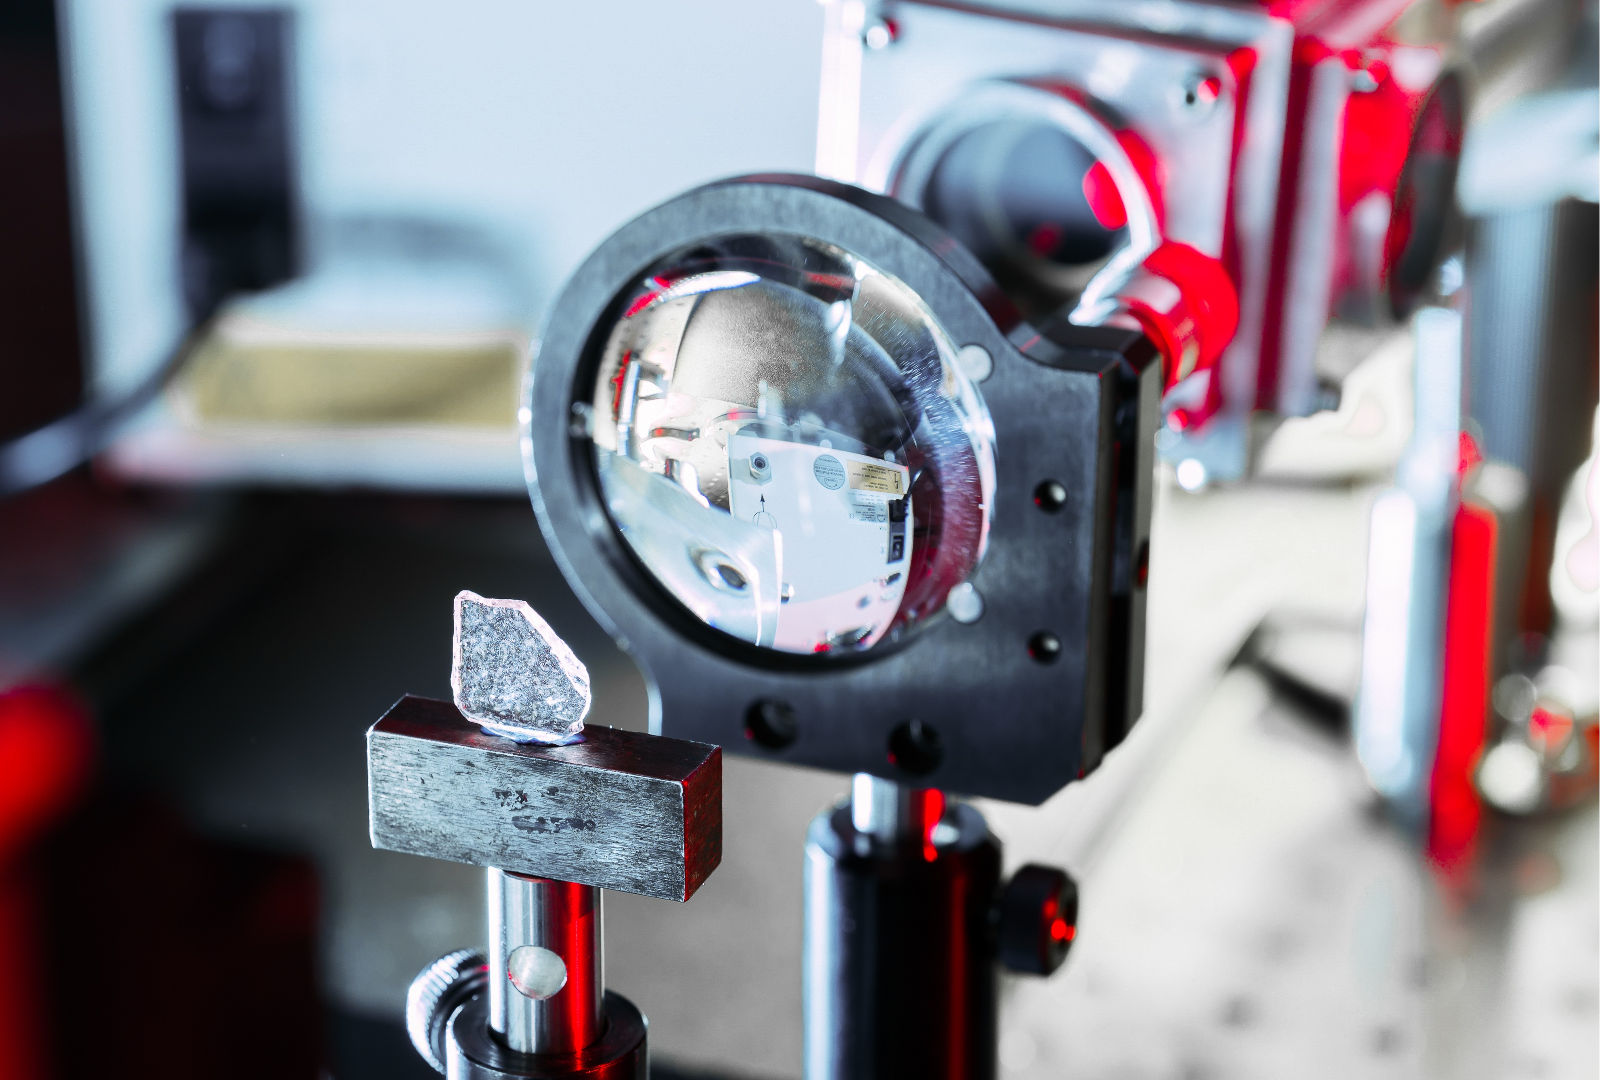 Optical spectroscopy set-up for characterization of ceramic materials.